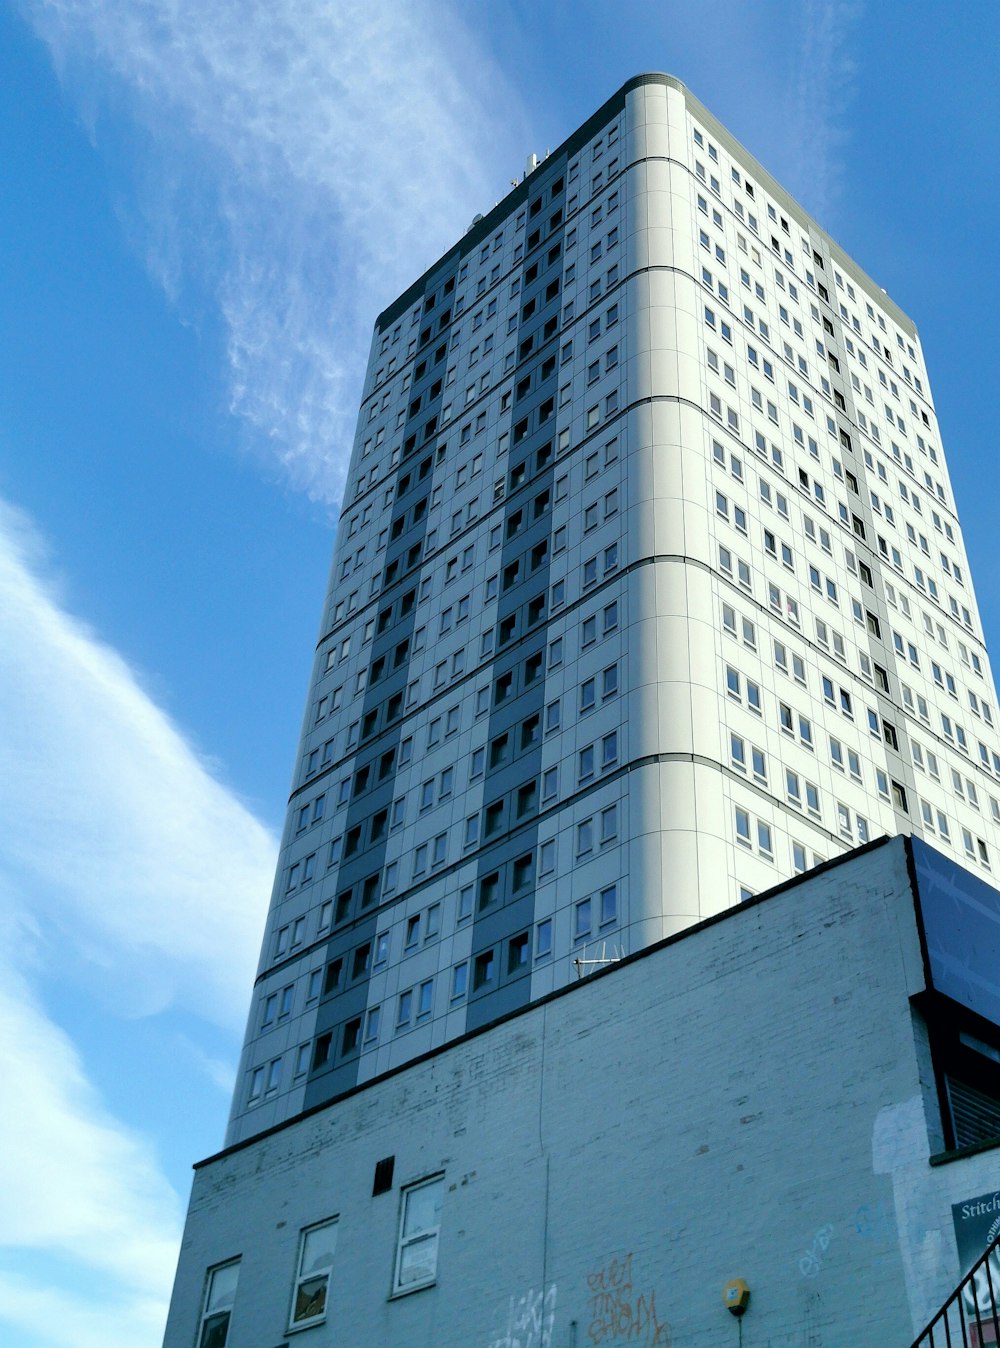 a tall white building with lots of windows